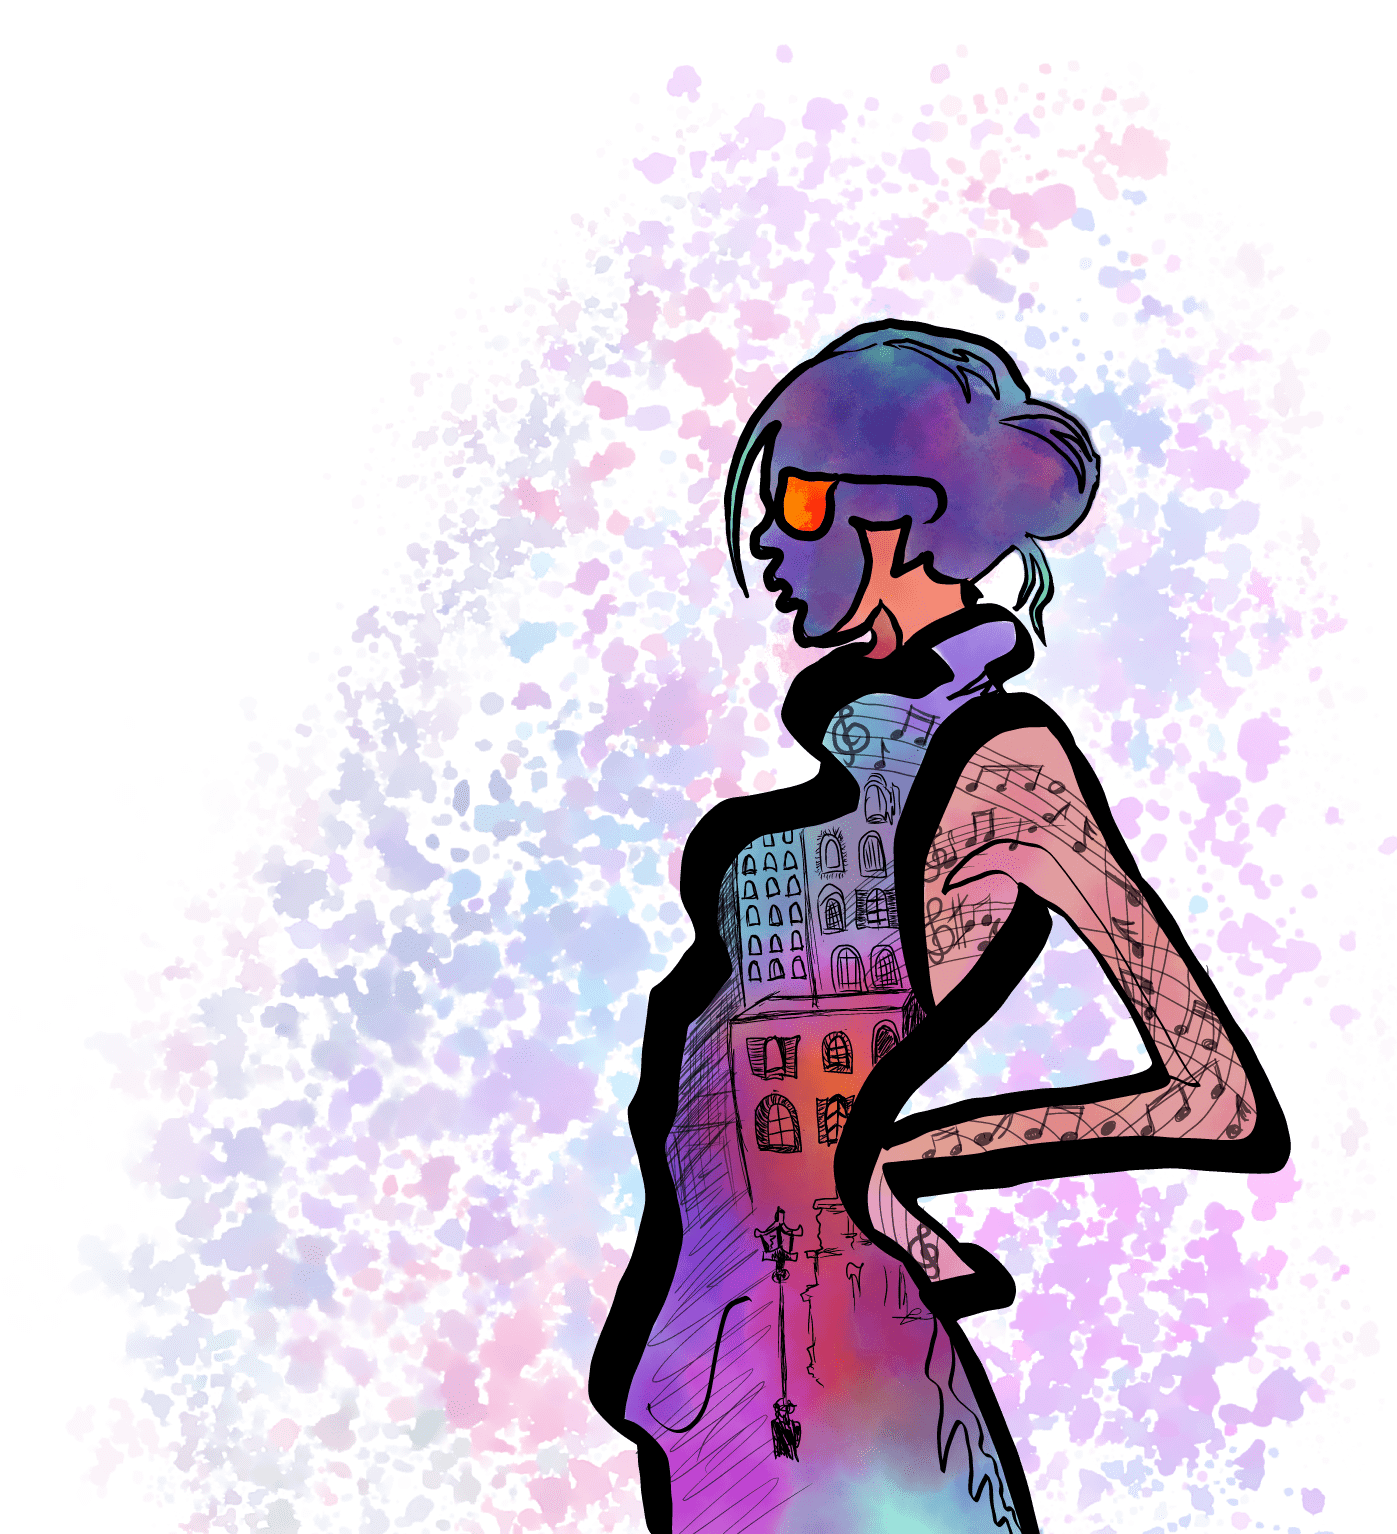 Digital illustration of a brightly colored, fierce-looking woman